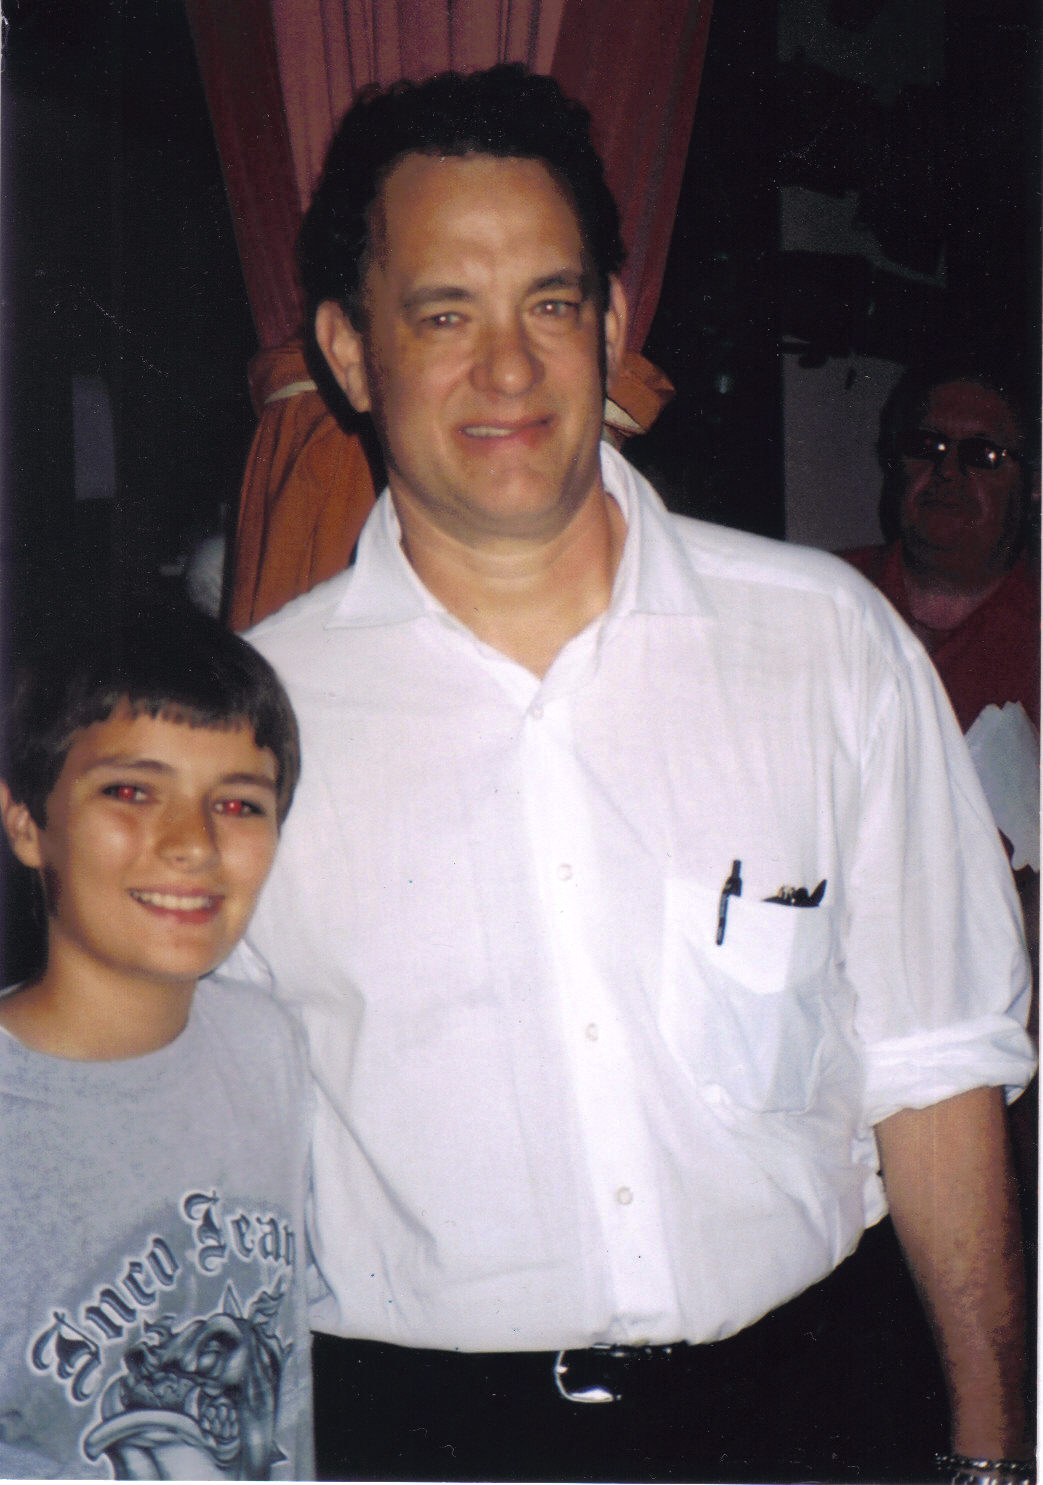 First performance with weSPARK teen drama group at weSPARKLE for late Wendie Jo Sperber. Tom Hanks and Dylan